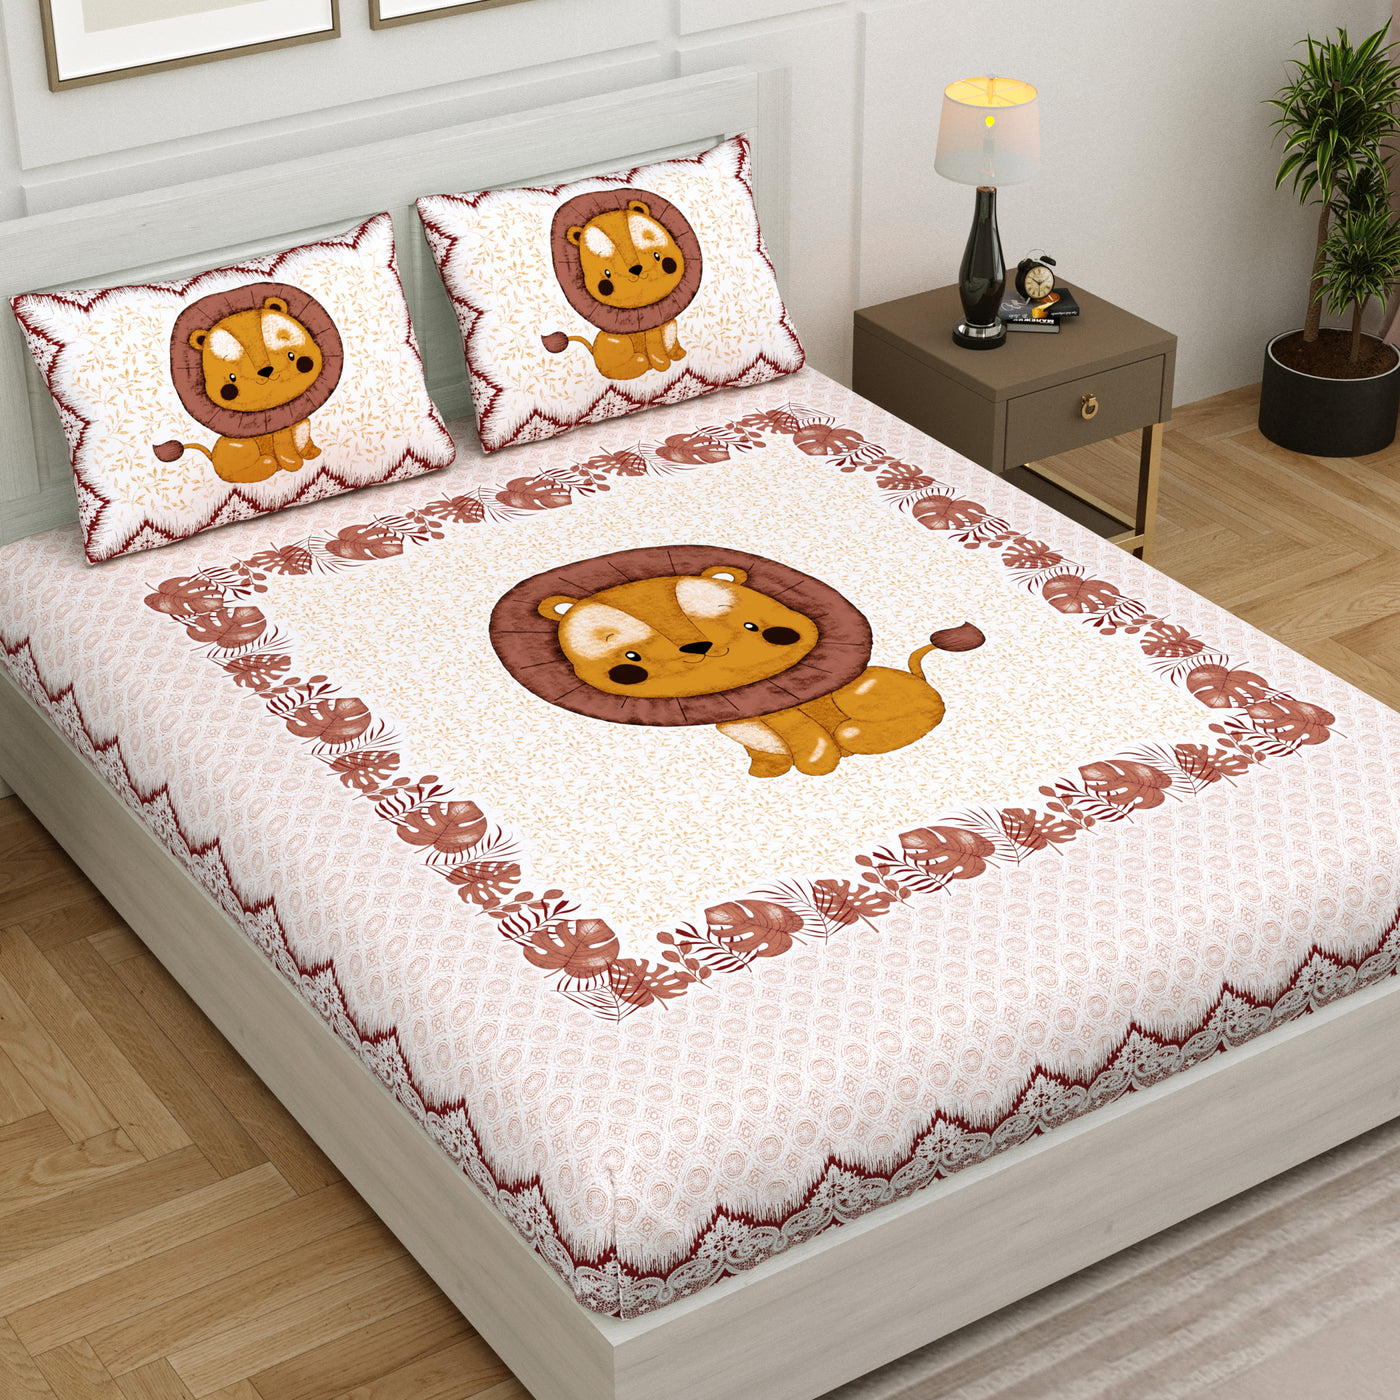 Wanderlust Premium | Kids Collection | King Size 100 x 108 in | 100% Pure Cotton | Bedsheet For Double Bed with 2 Pillow Covers - Baby Lion Design